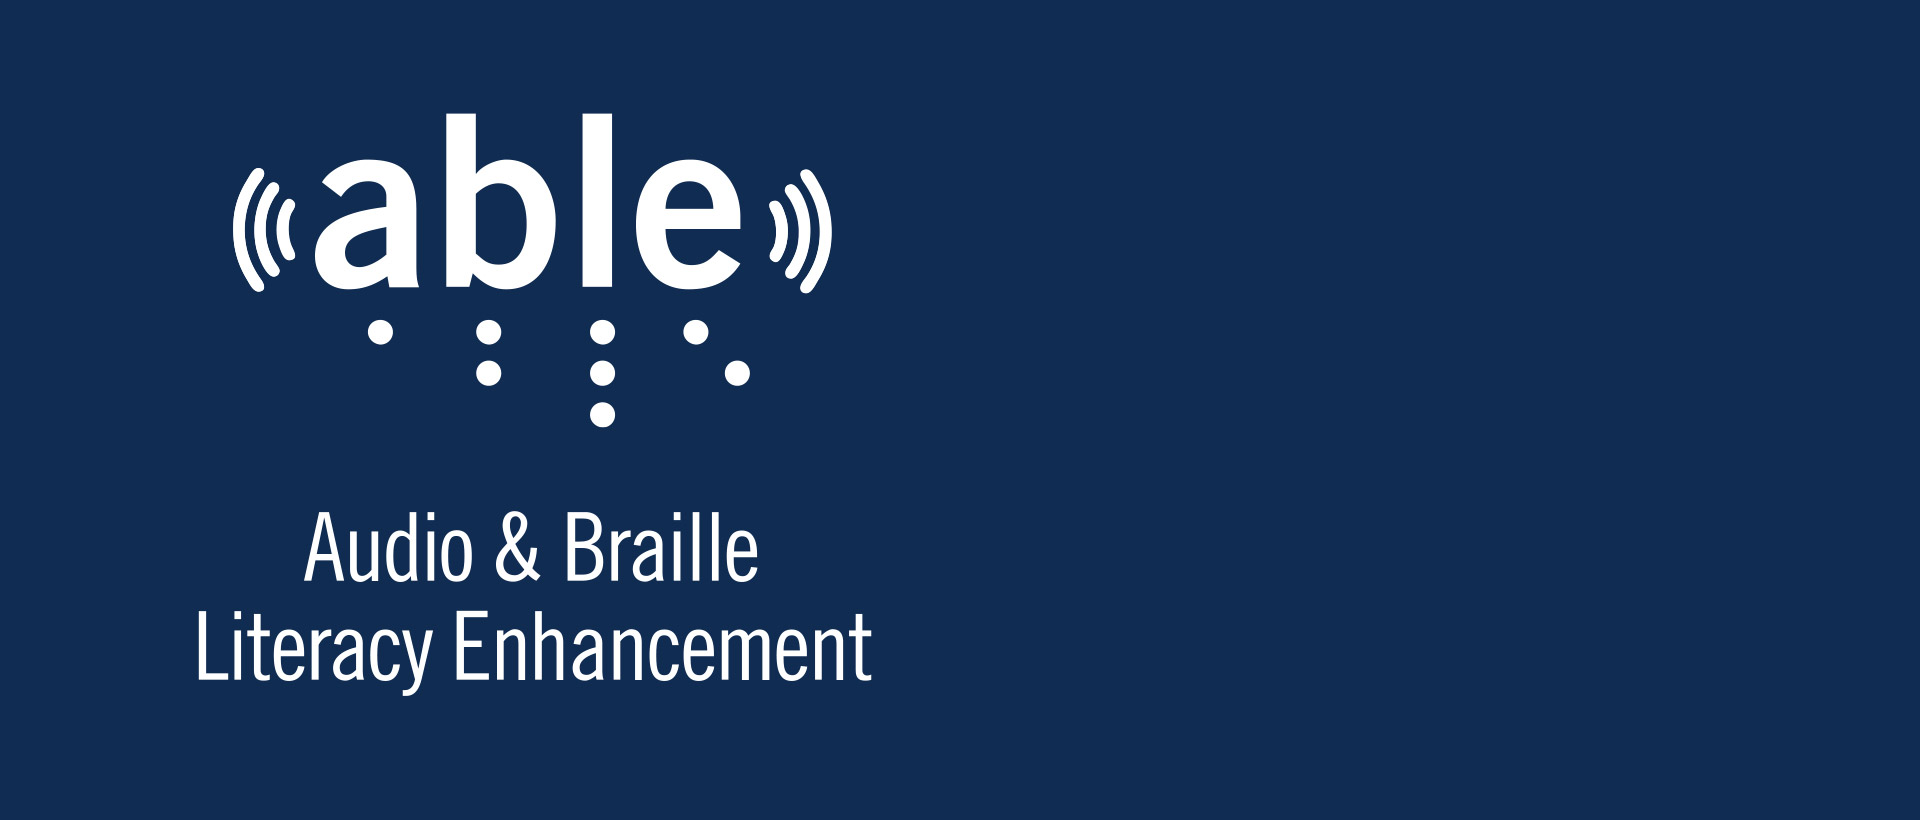 able audio and braille literacy enhancement logo